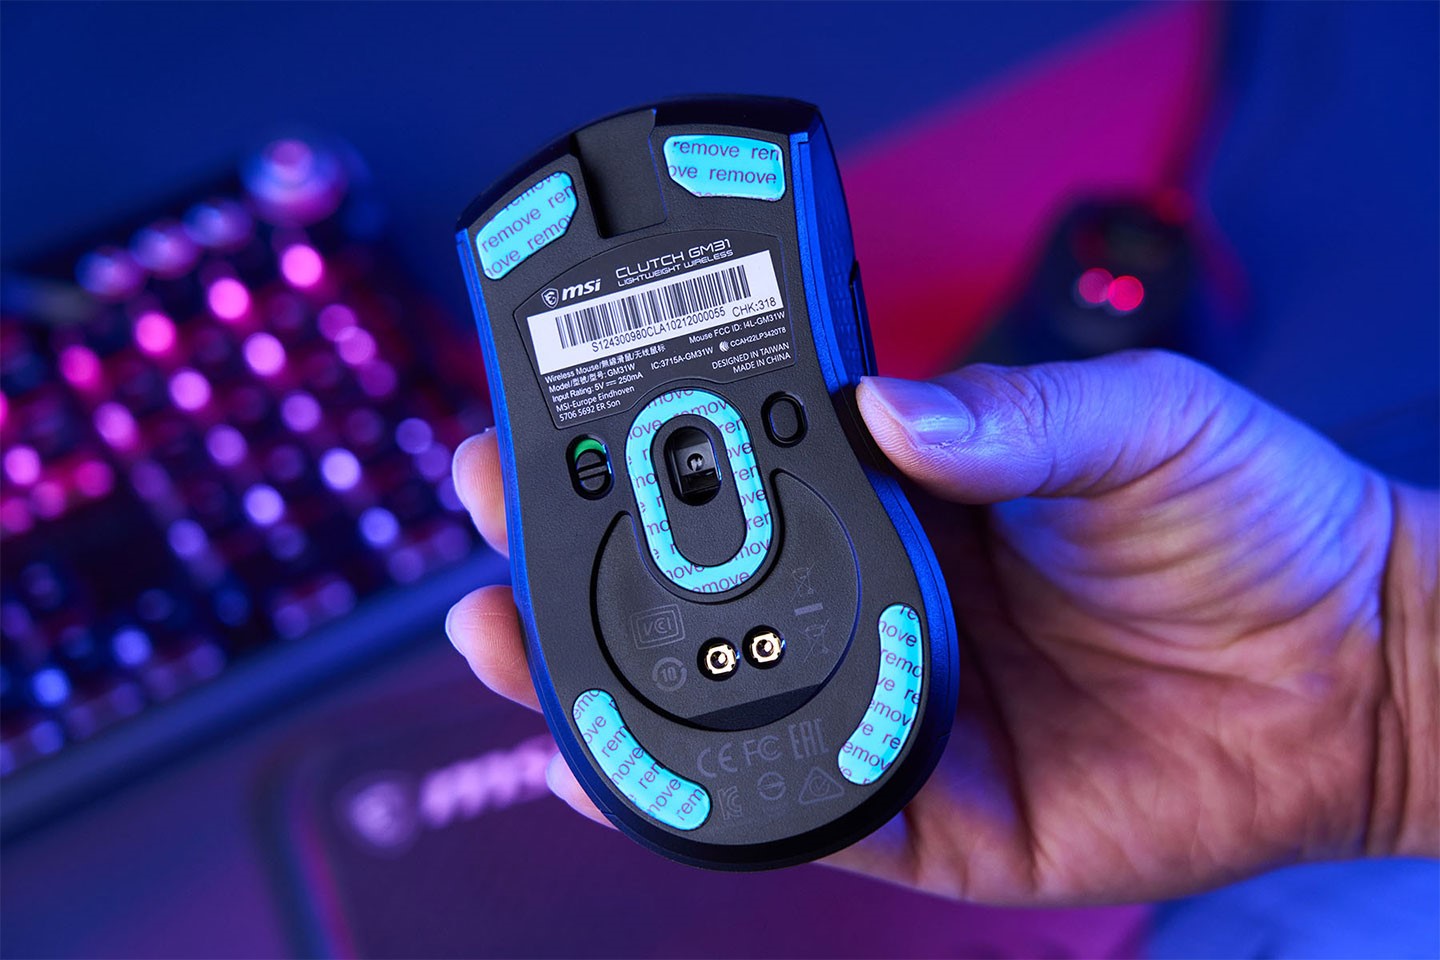 The bottom is equipped with a PTFE mouse sticker, which can increase the smoothness of the mouse movement. Remember to remove the protective layer of the mouse sticker before use.